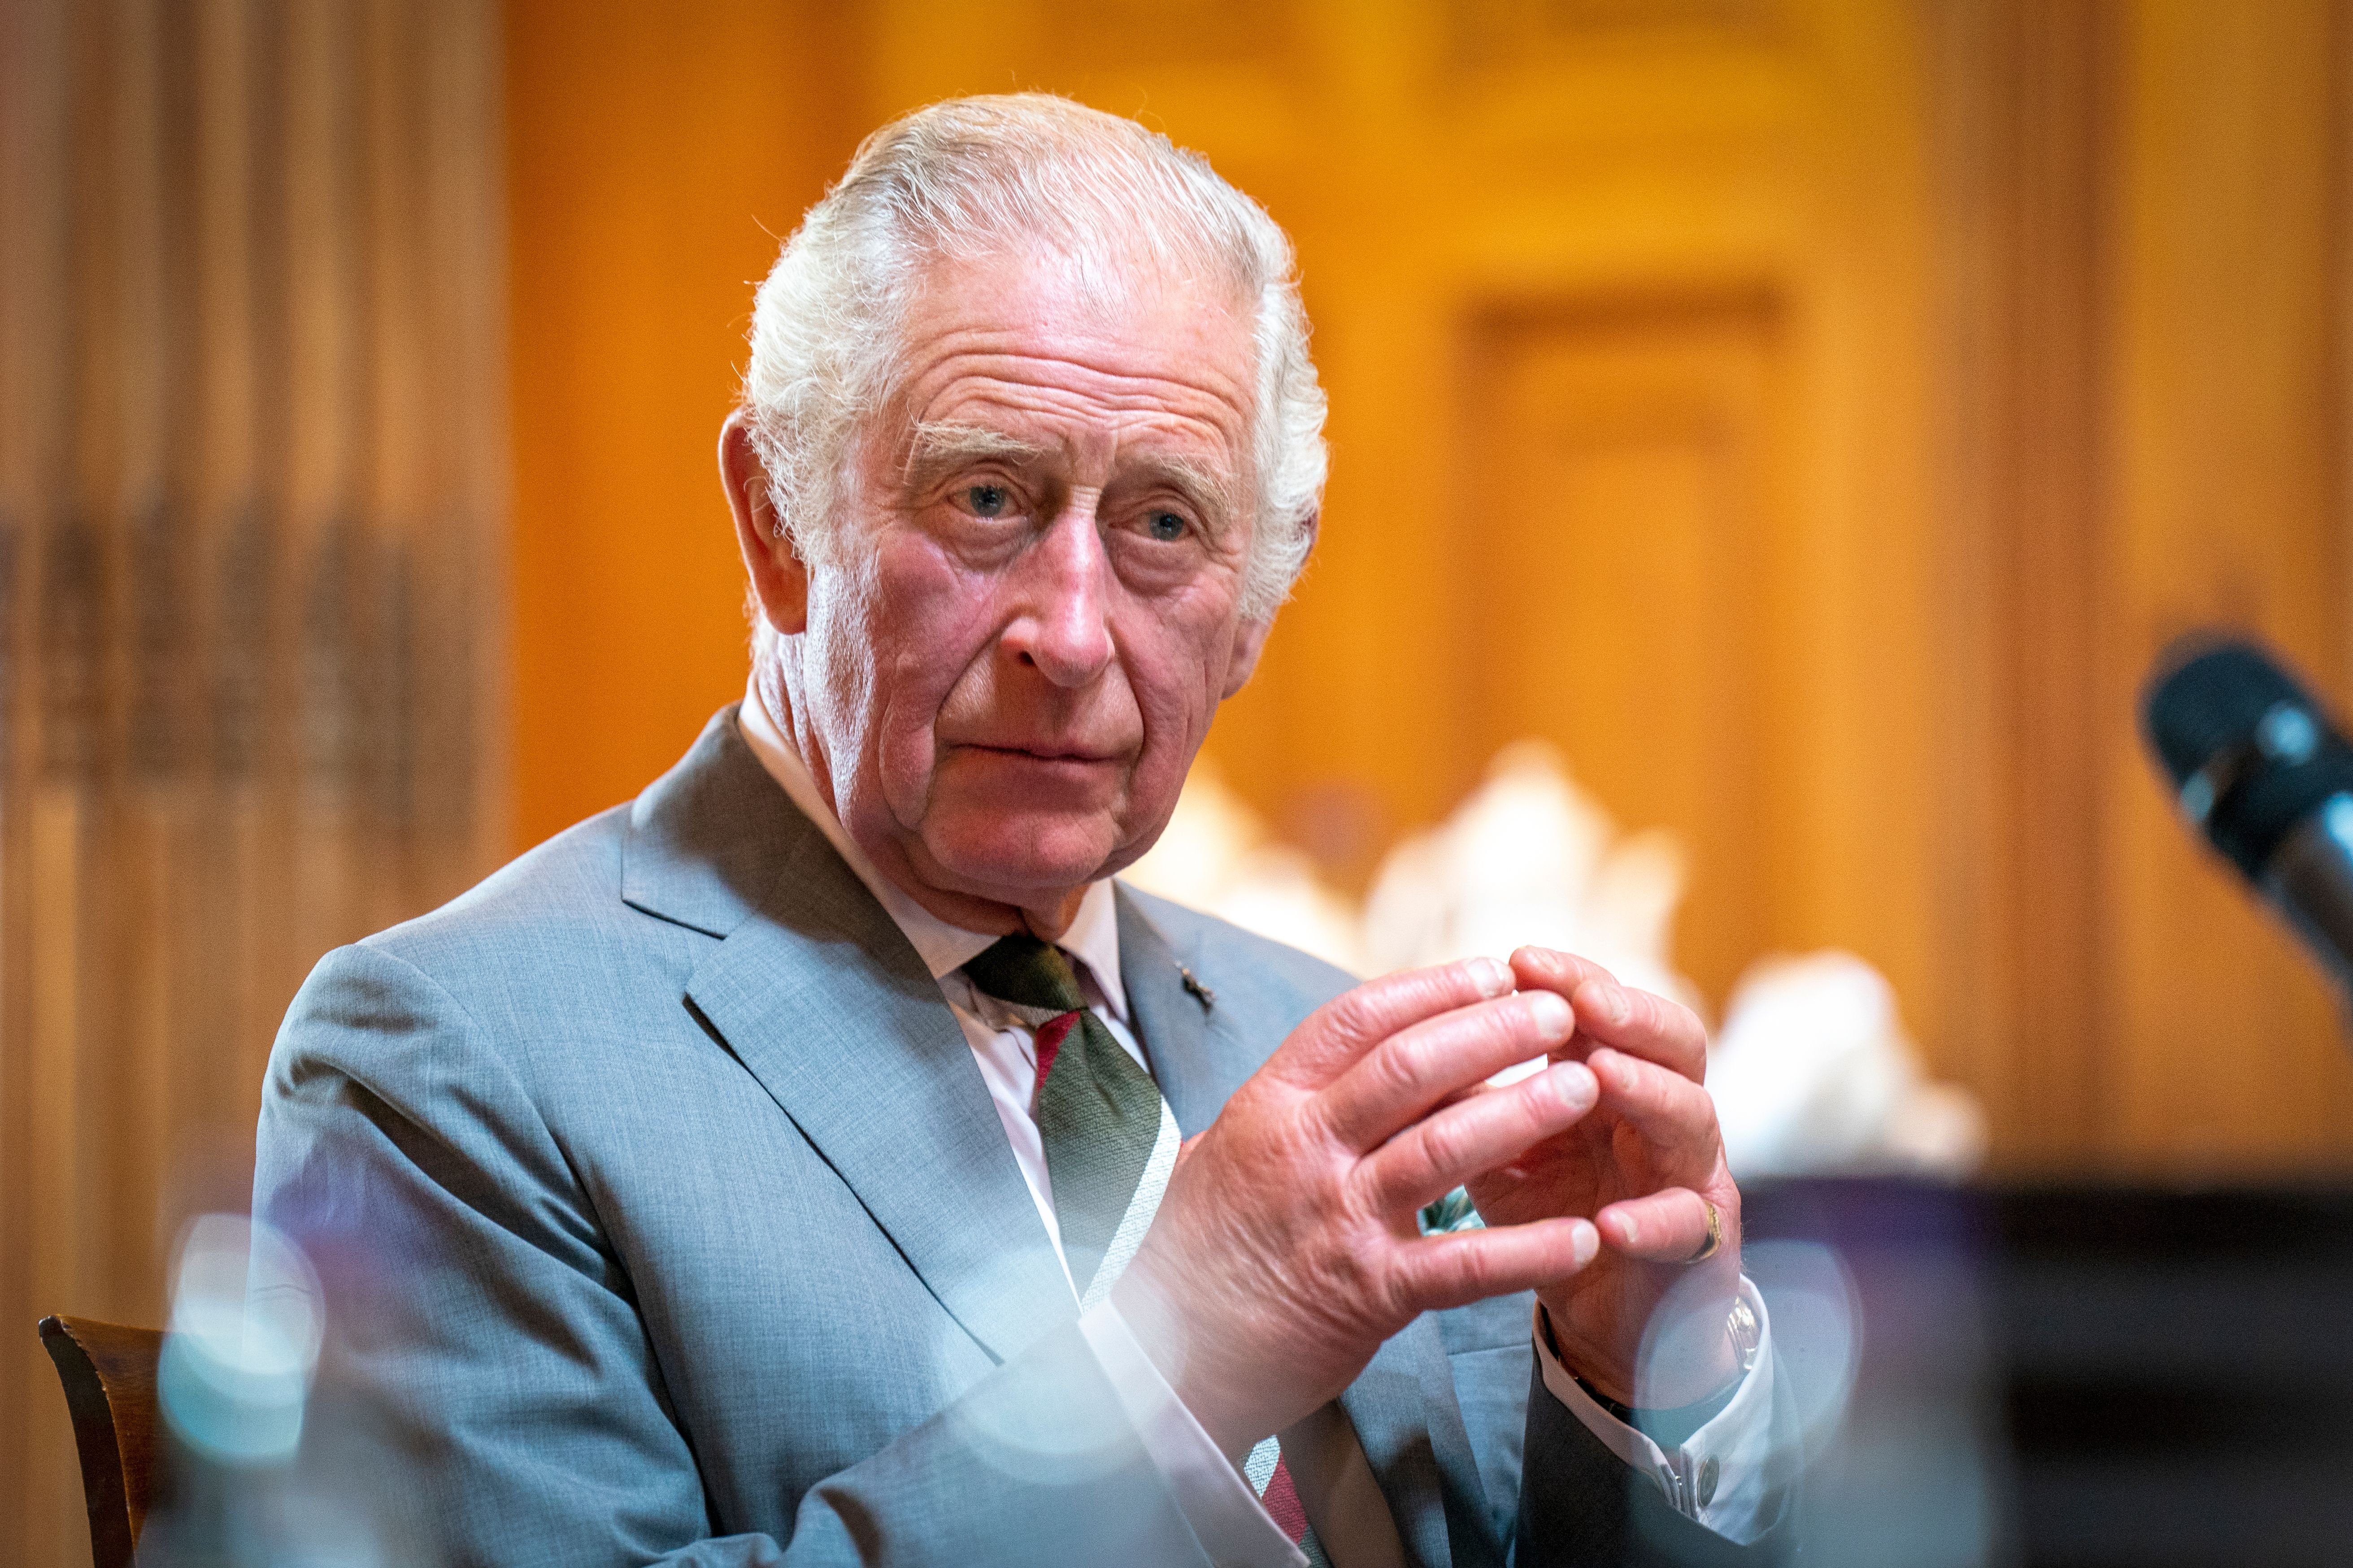 King Charles III during a roundtable discuss allergies and the environment, at Dumfries House, Cumnock on September 7, 2022, in Lanark, Scotland. | Source: Getty Images